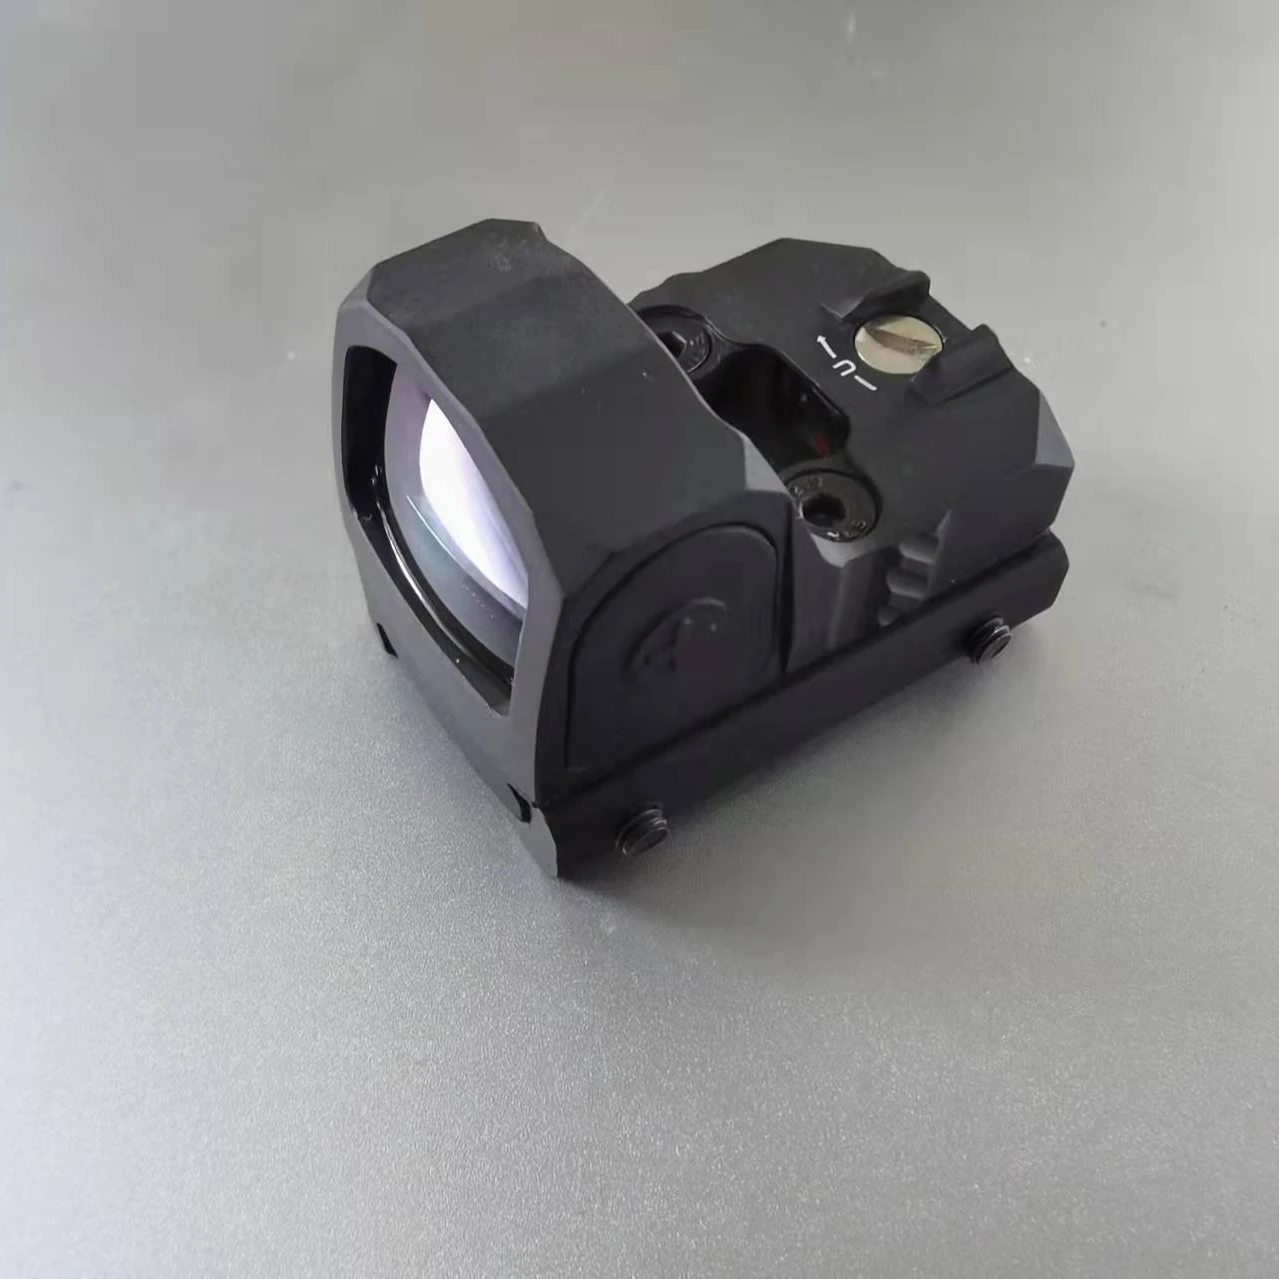 

Metal RMR Red Dot Sight Scope Collimator Reflex Sight Scope Fit 20mm Weaver Rail For Airsoft Hunting Holographic Sight